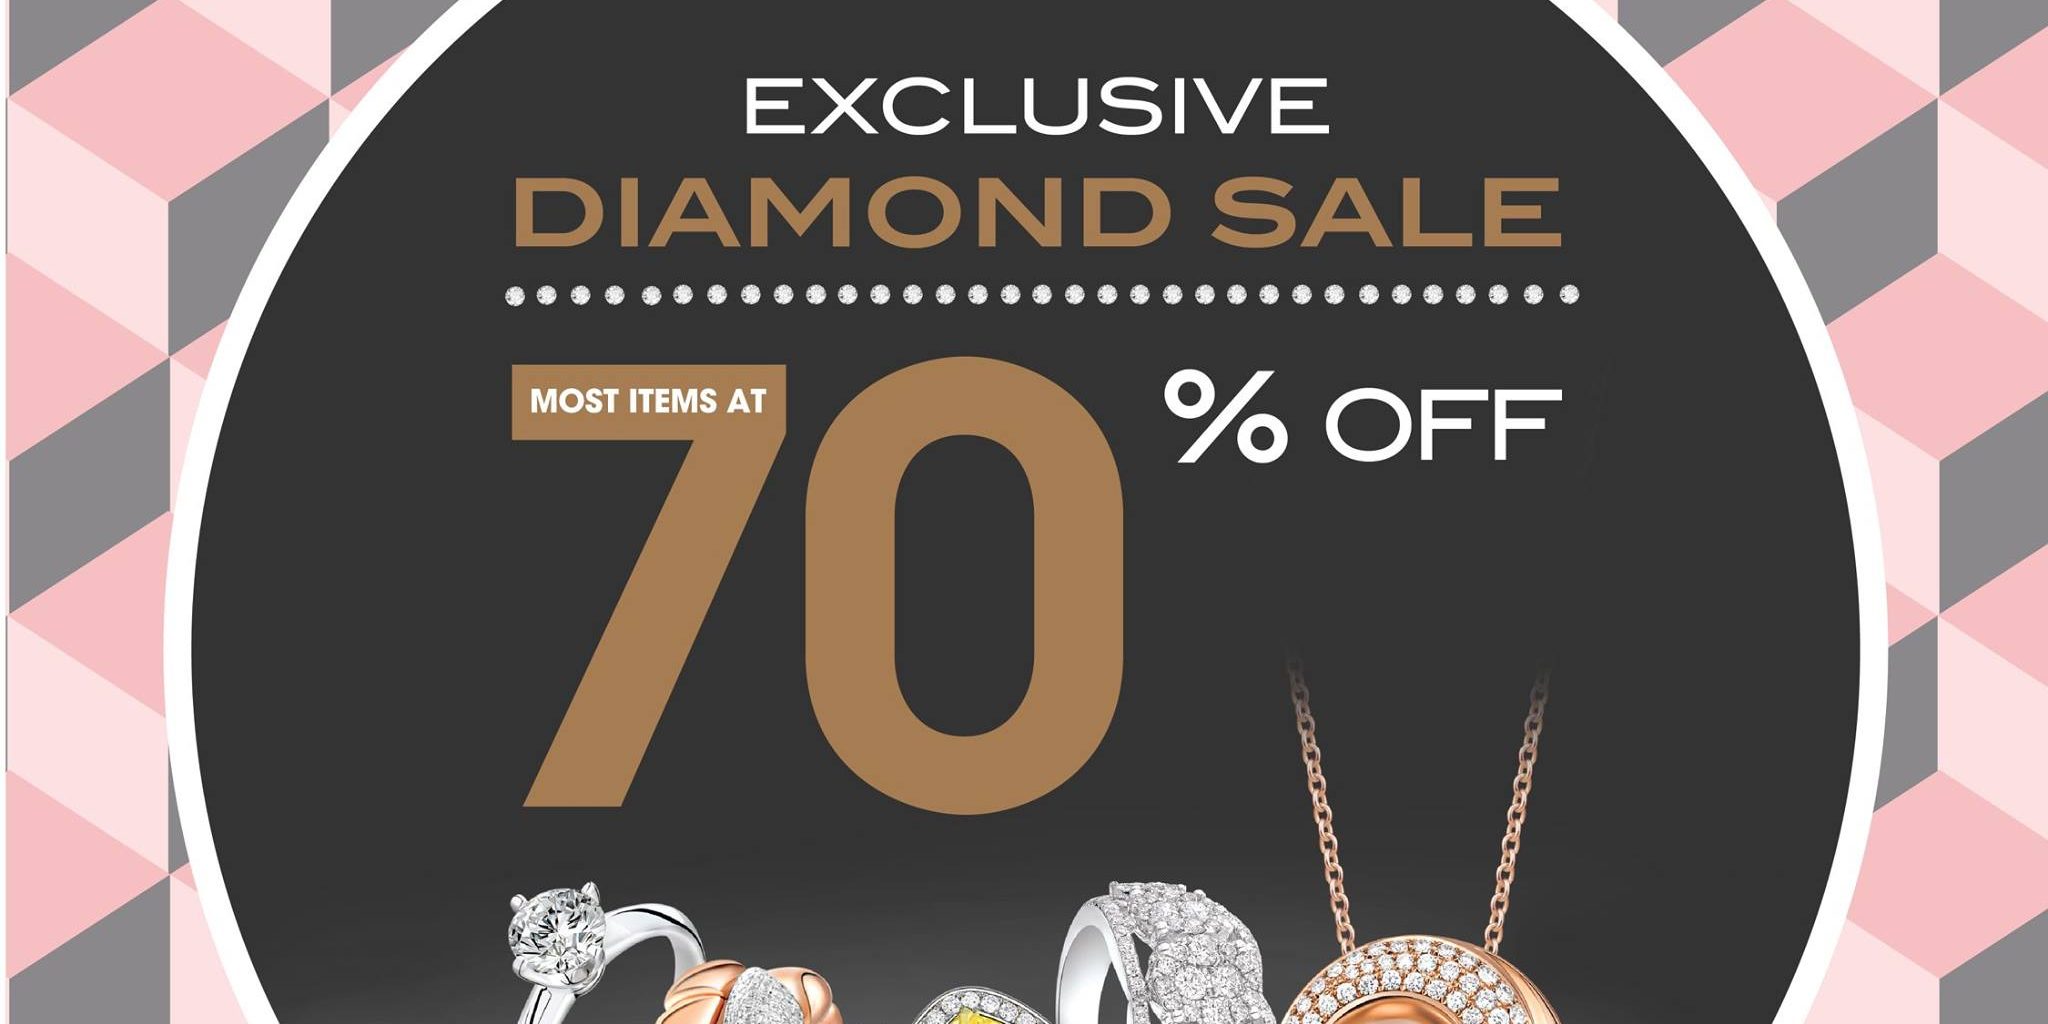 SOO KEE Jewellery 4 Days Exclusive Diamond Sale 70% Off Promotion 28 Apr – 1 May 2017